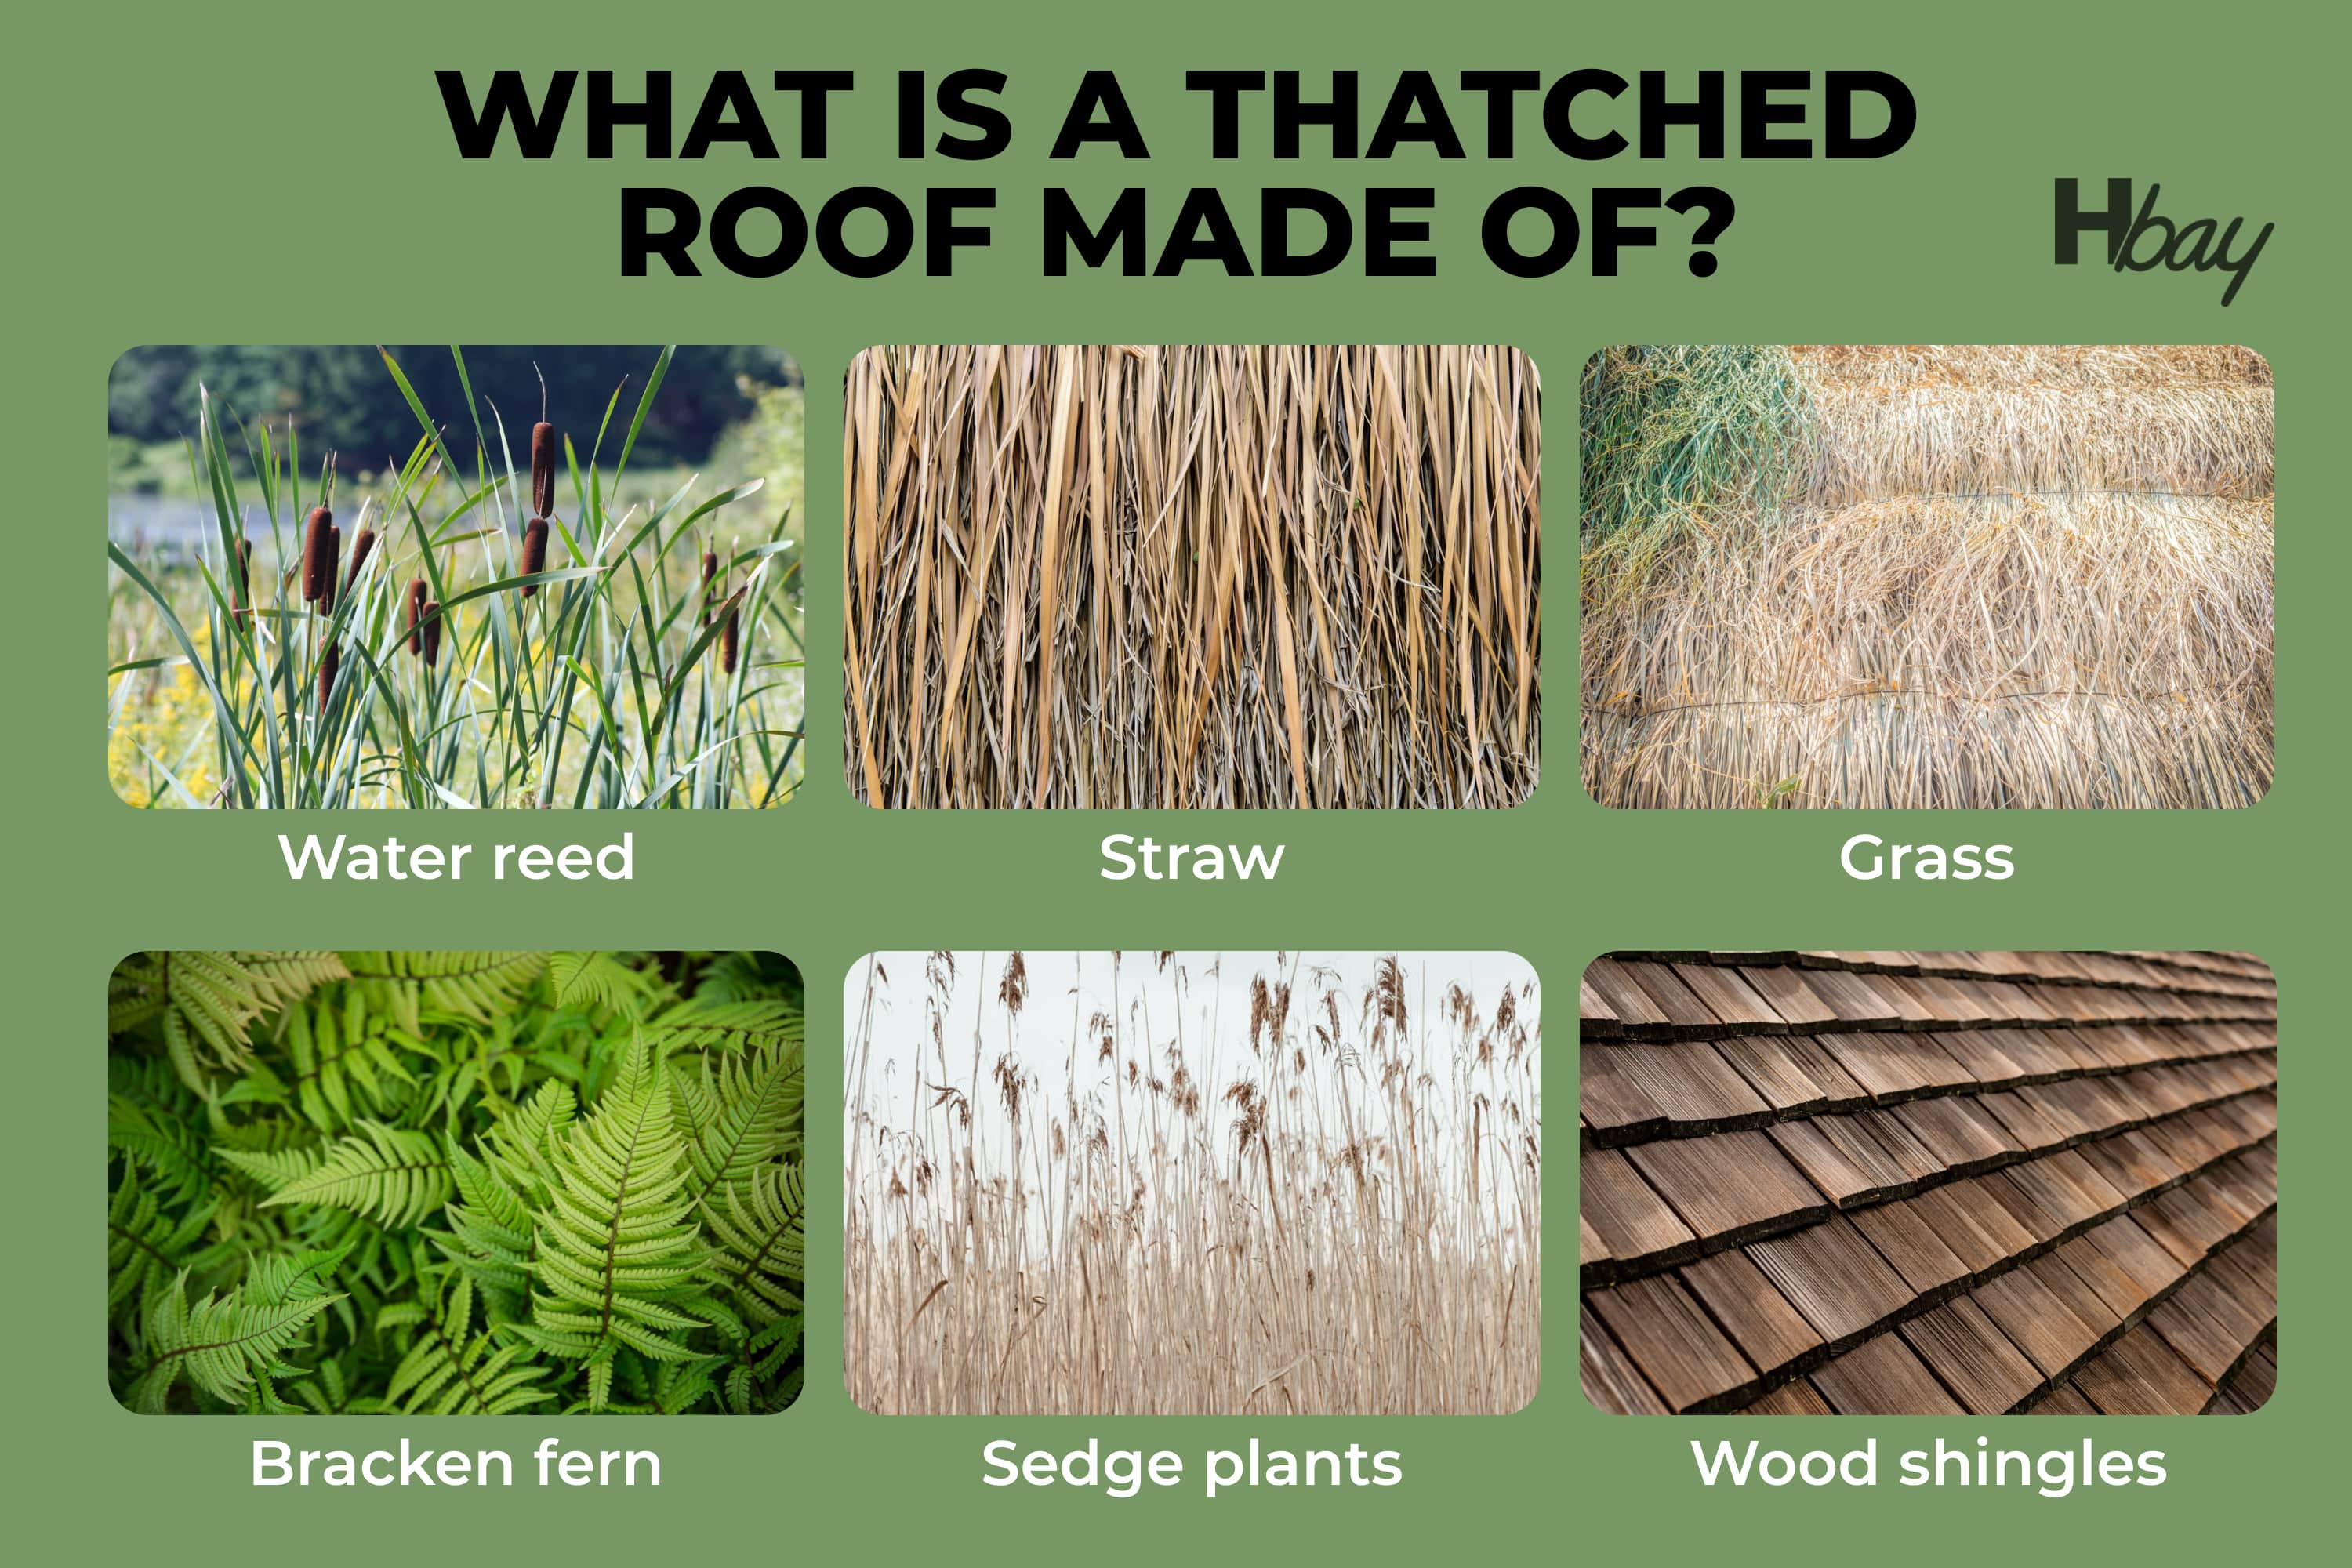 What Is a Thatched Roof Made Of